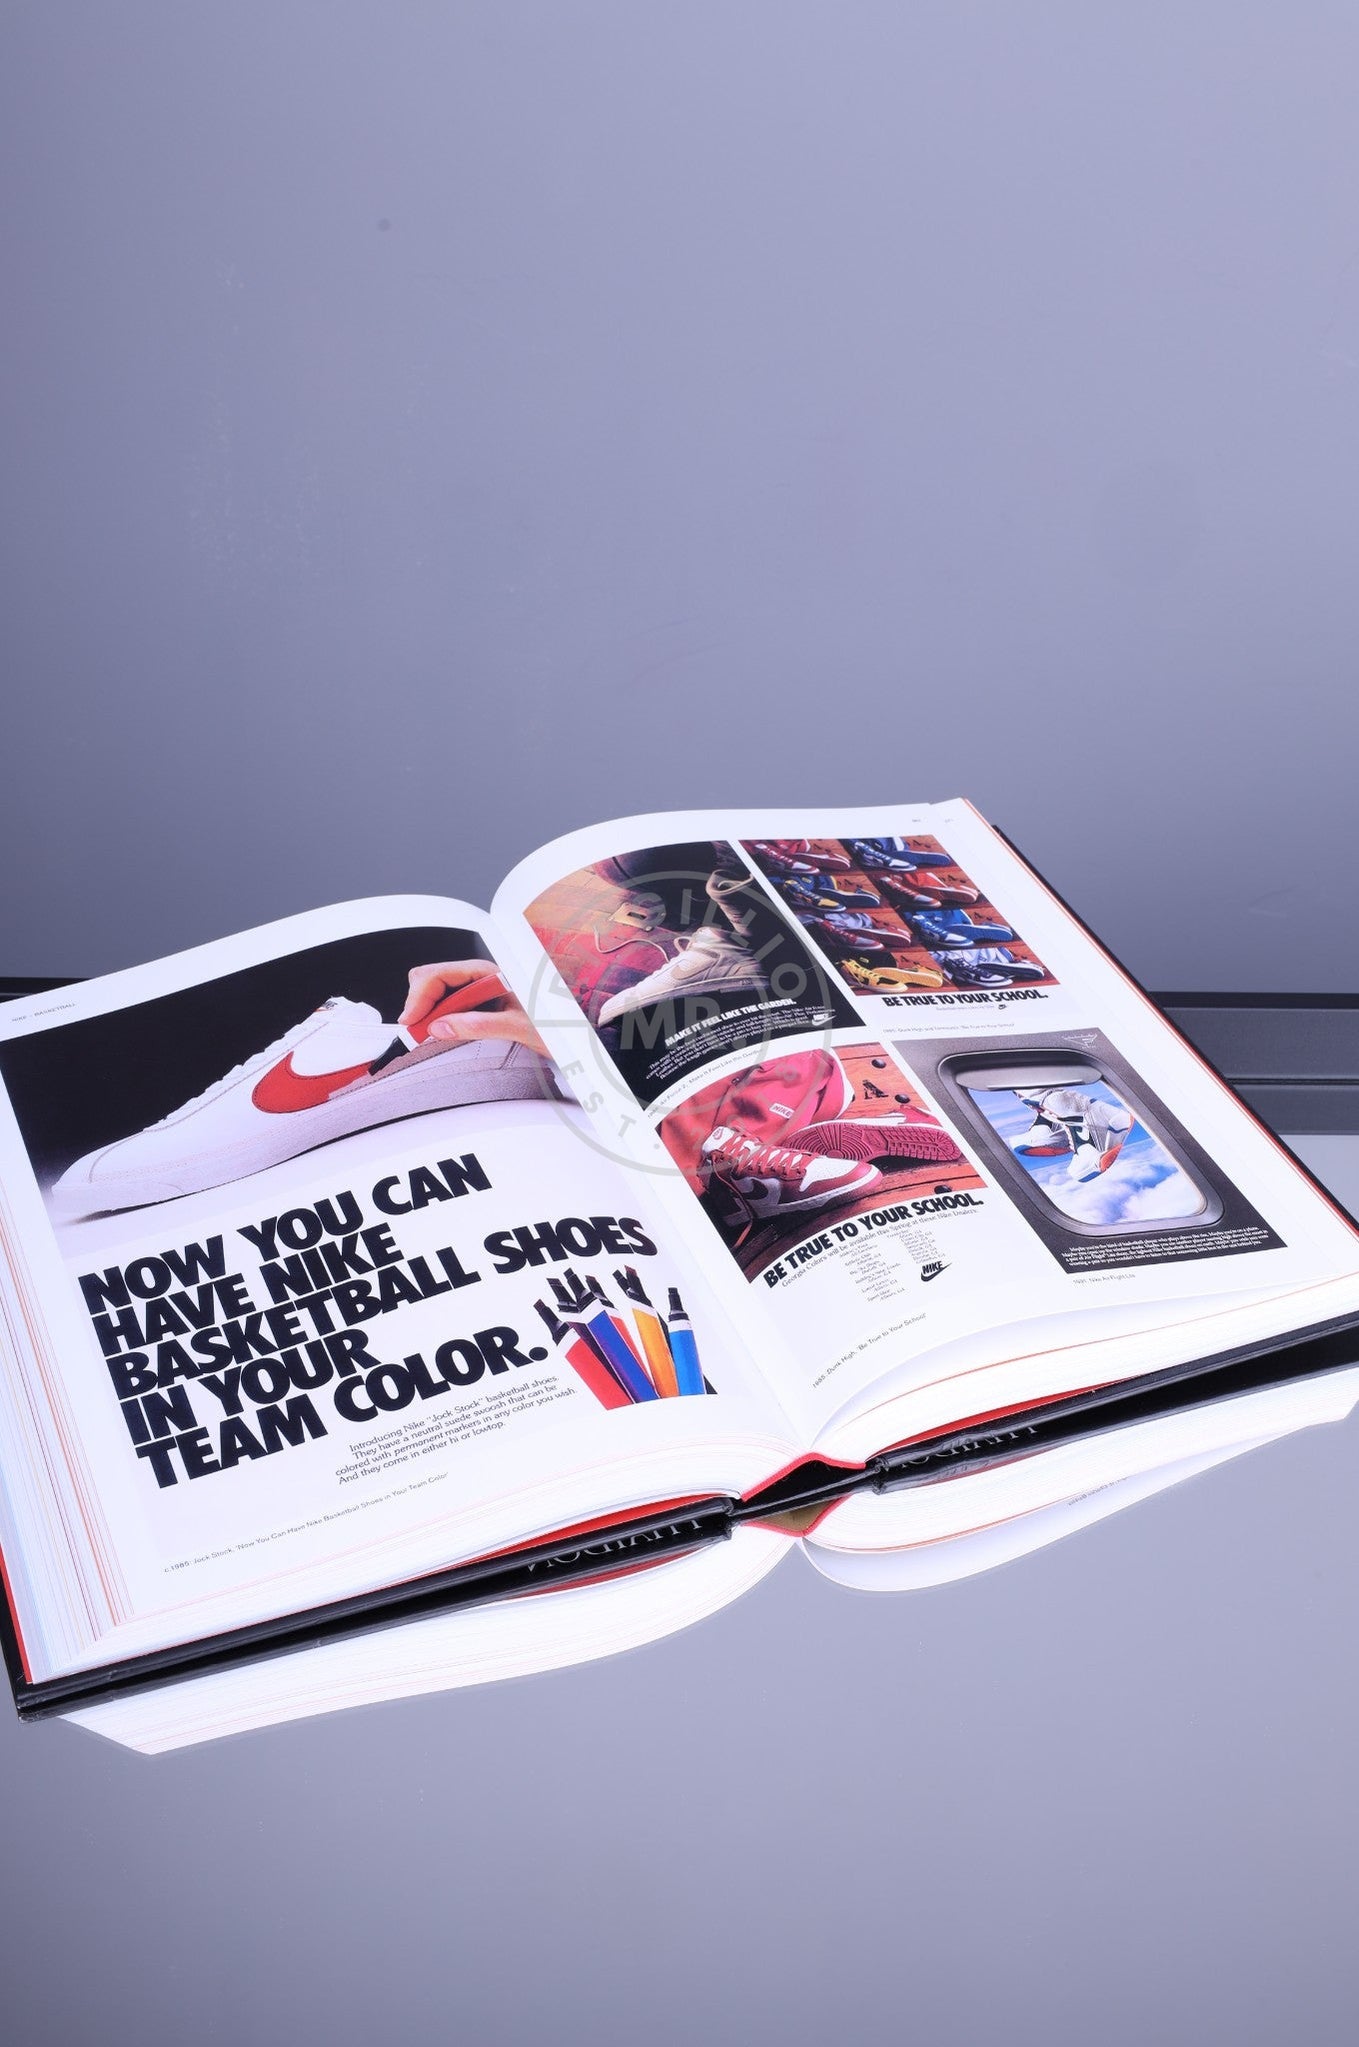 Table Book Sneaker Freaker – SOLED OUT: The Golden Age of Sneaker Advertising at MR. Riegillio